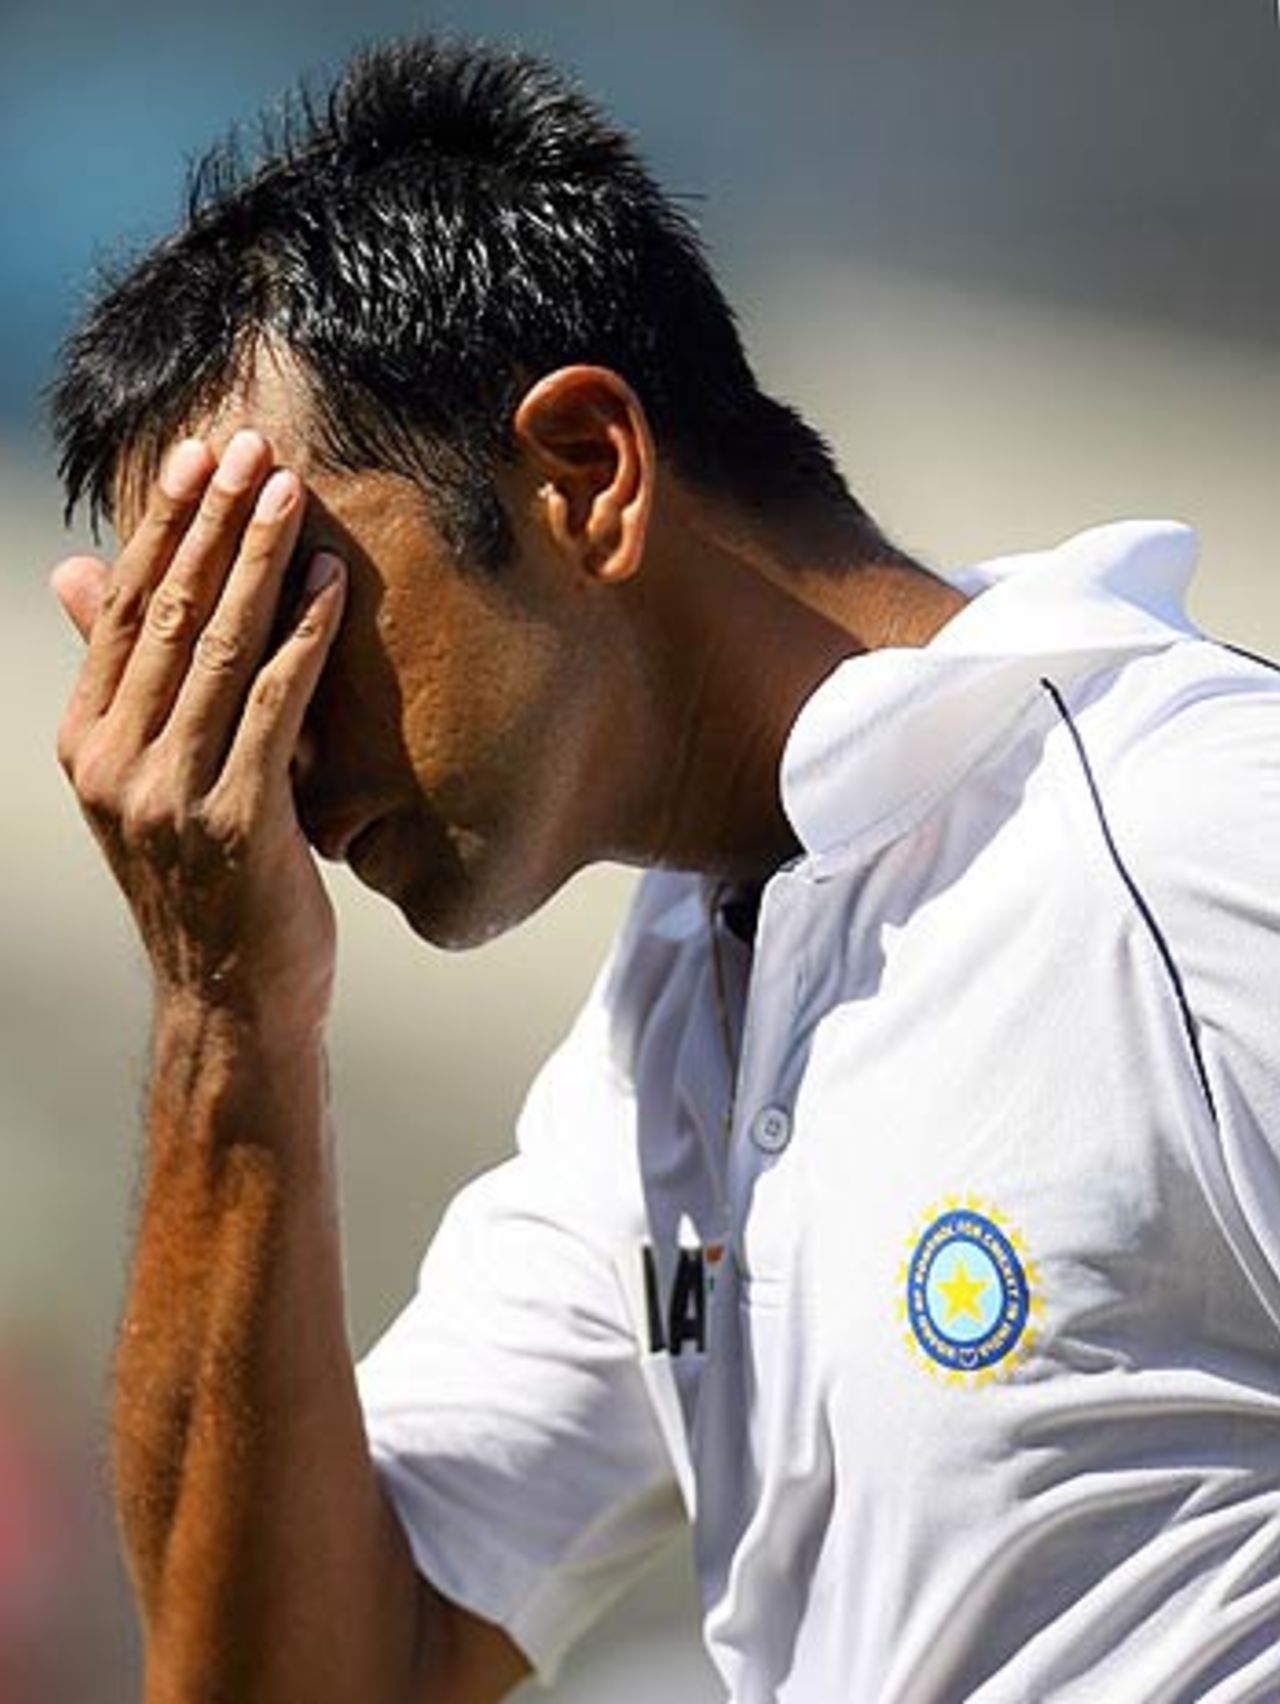 Rahul Dravid is disappointed after falling for 81, West Indies v India, 4th Test, Jamaica, 1st day, June 30, 2006